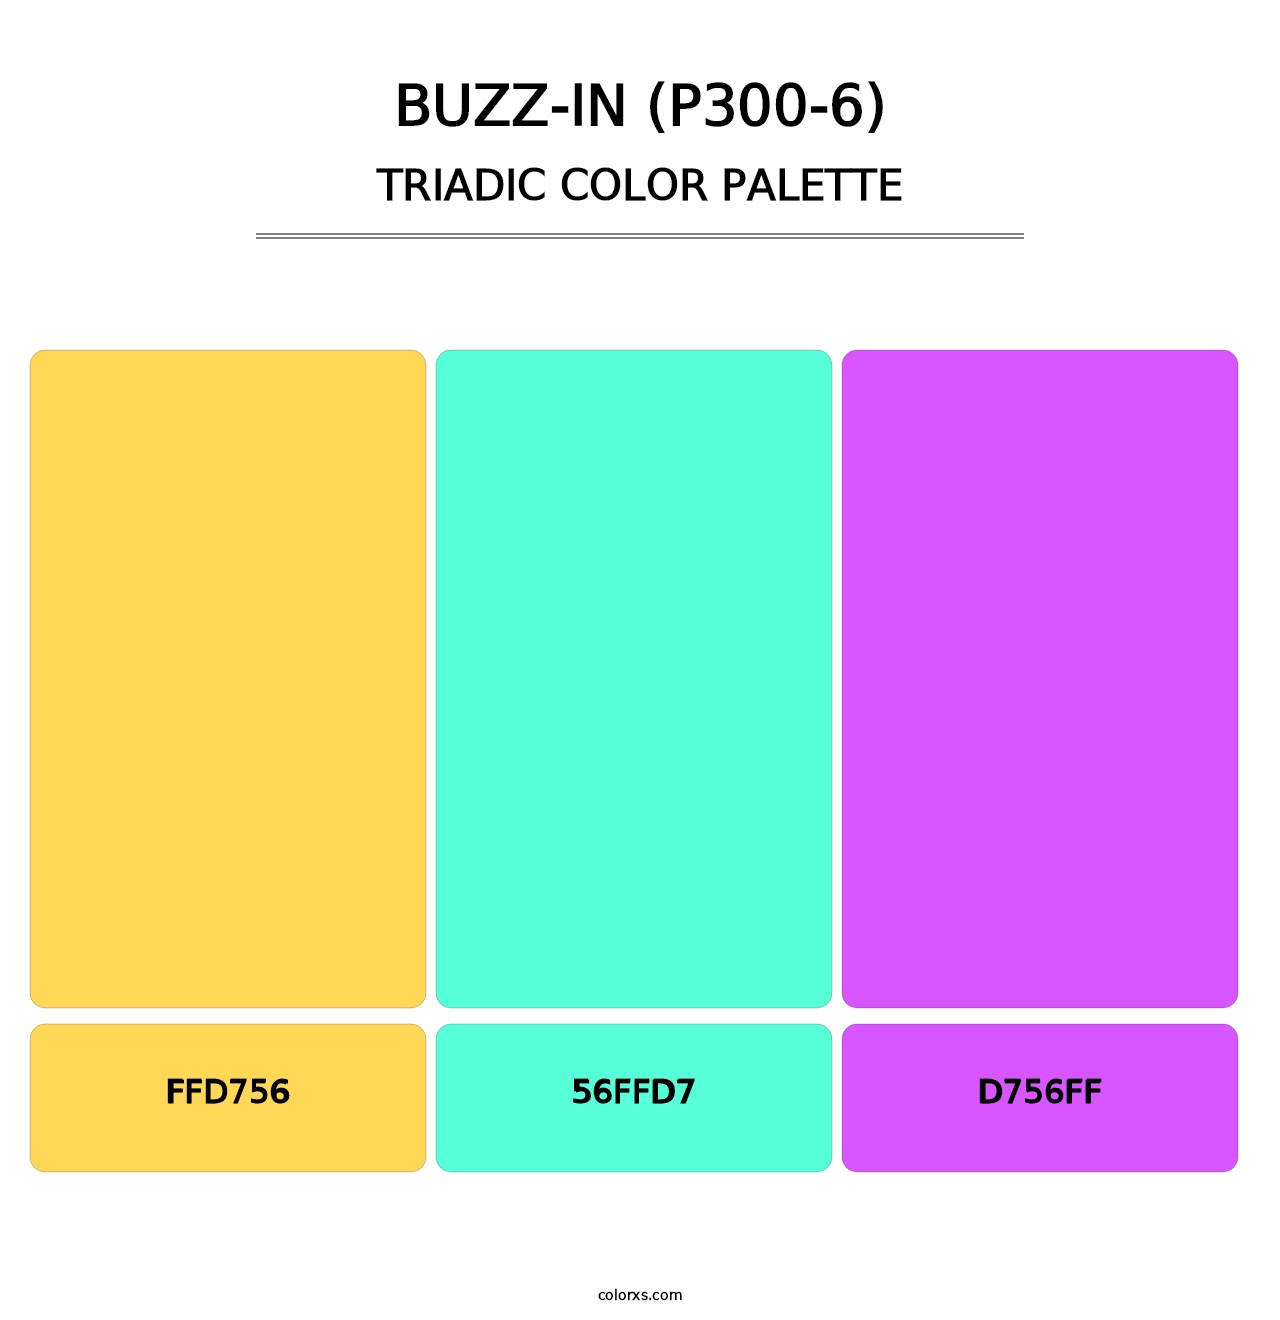 Buzz-In (P300-6) - Triadic Color Palette